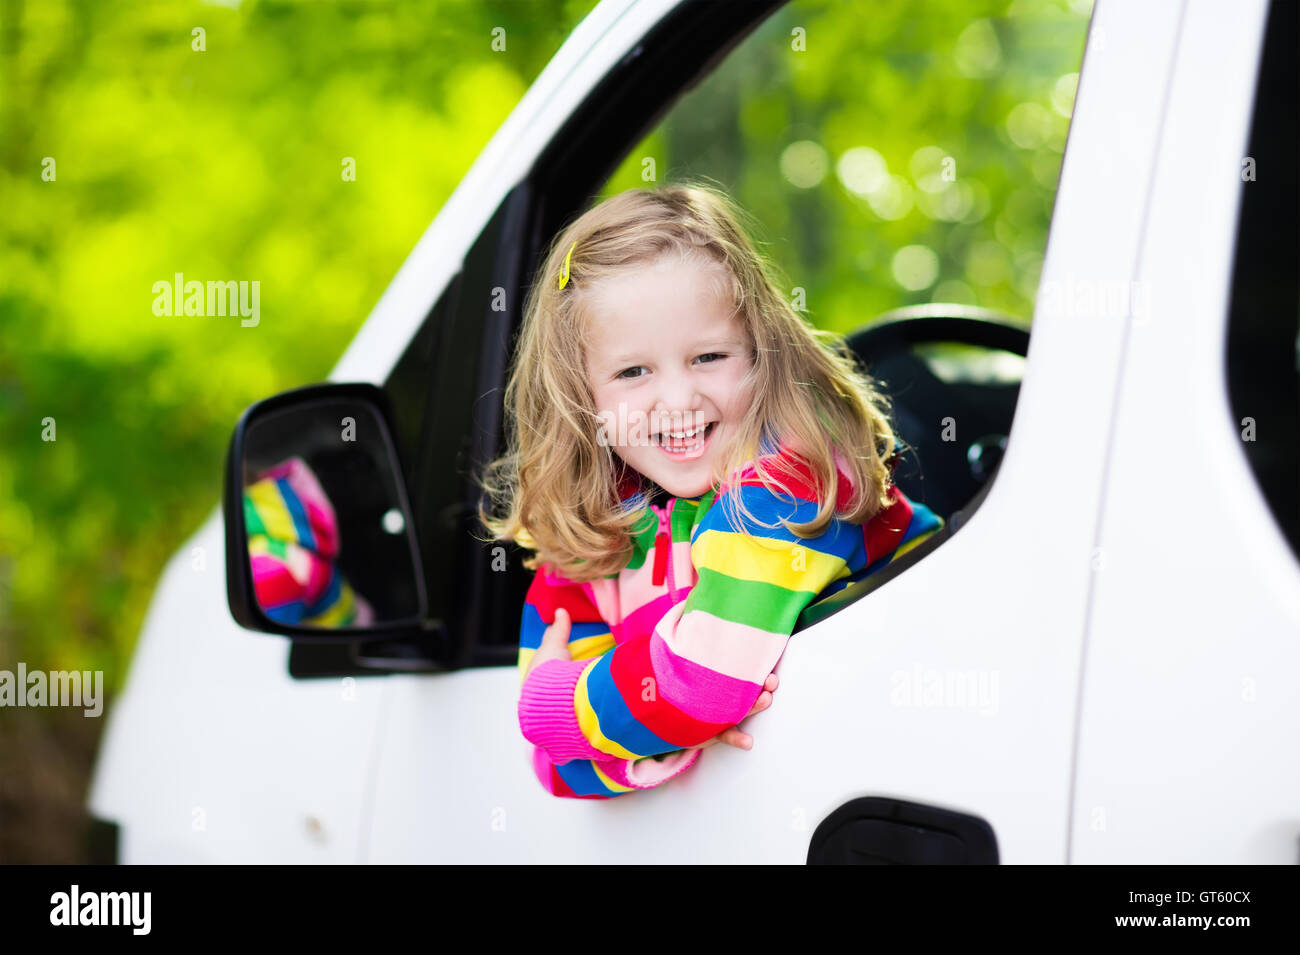 Little girl with funny pigtails watching out of car window sitting on front driver seat during a break on a family vacation trip Stock Photo